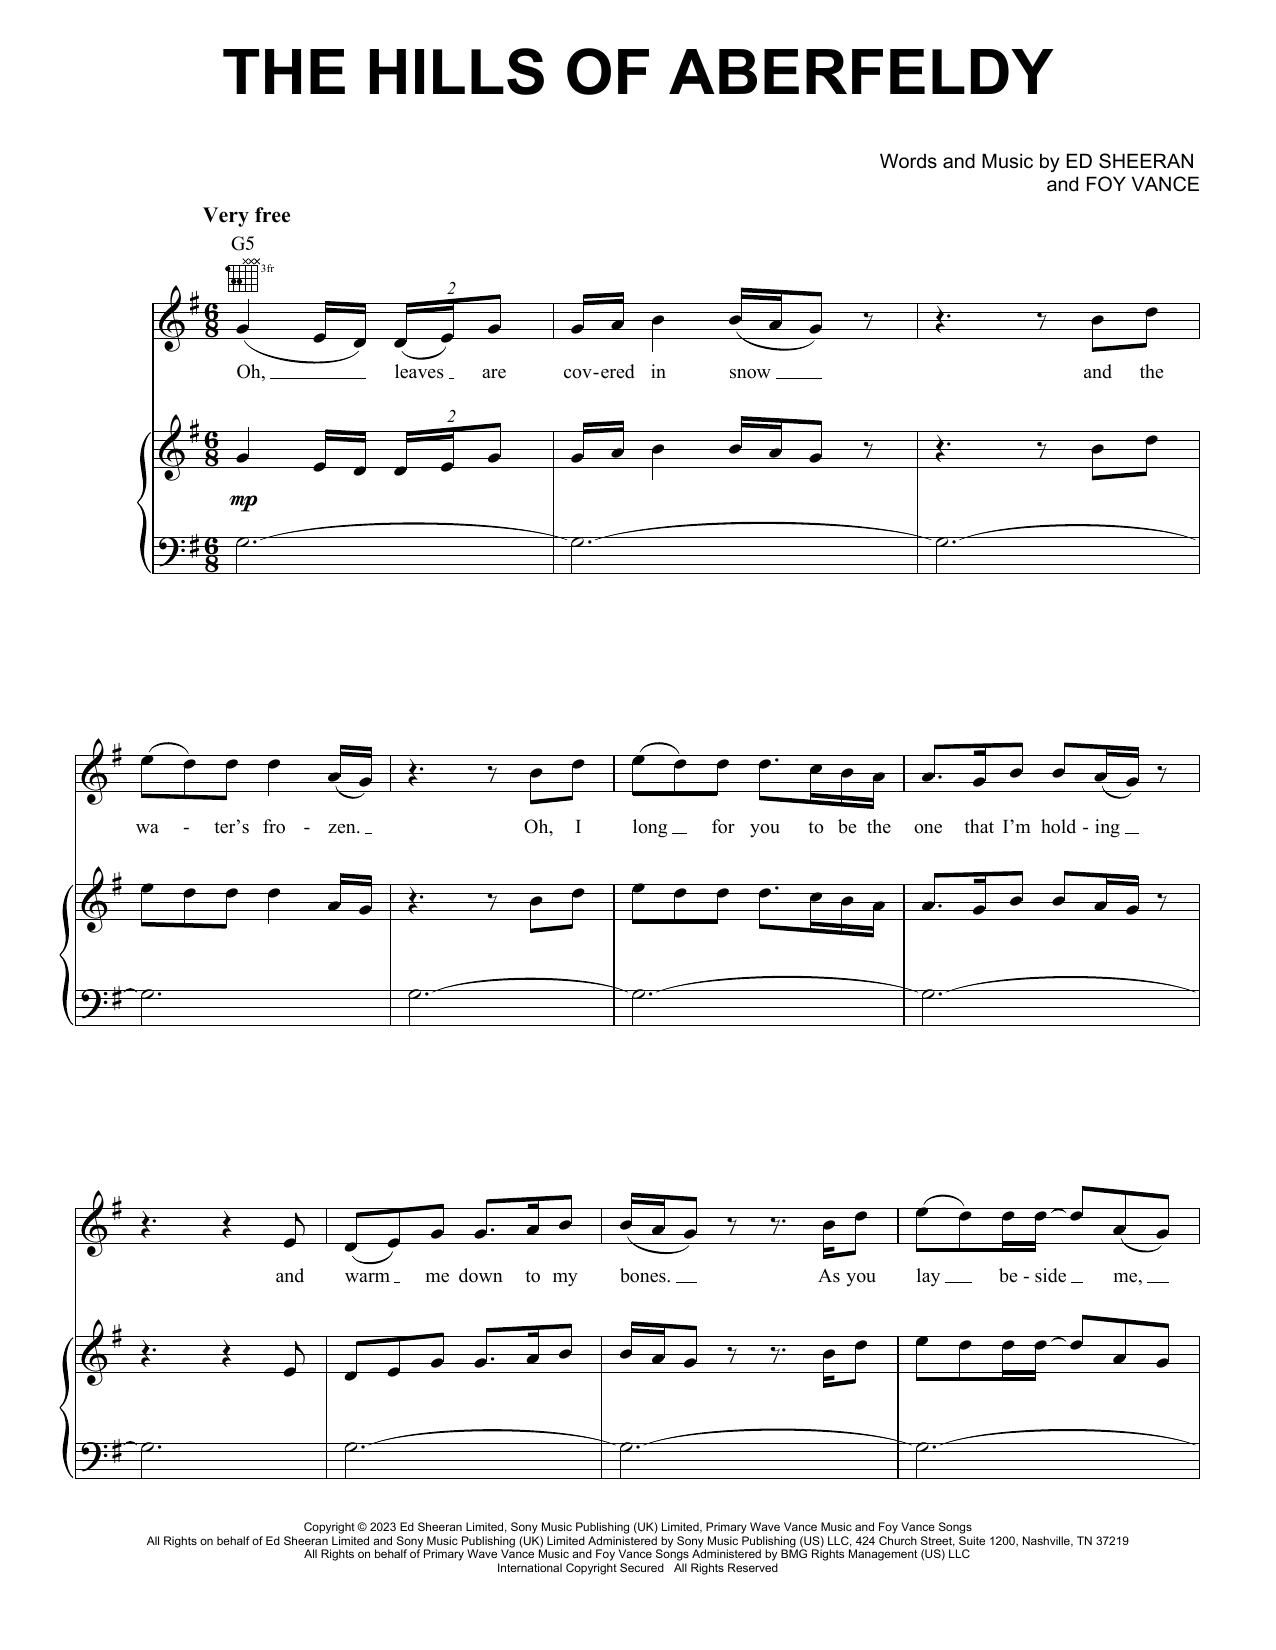 Ed Sheeran The Hills Of Aberfeldy sheet music notes and chords. Download Printable PDF.